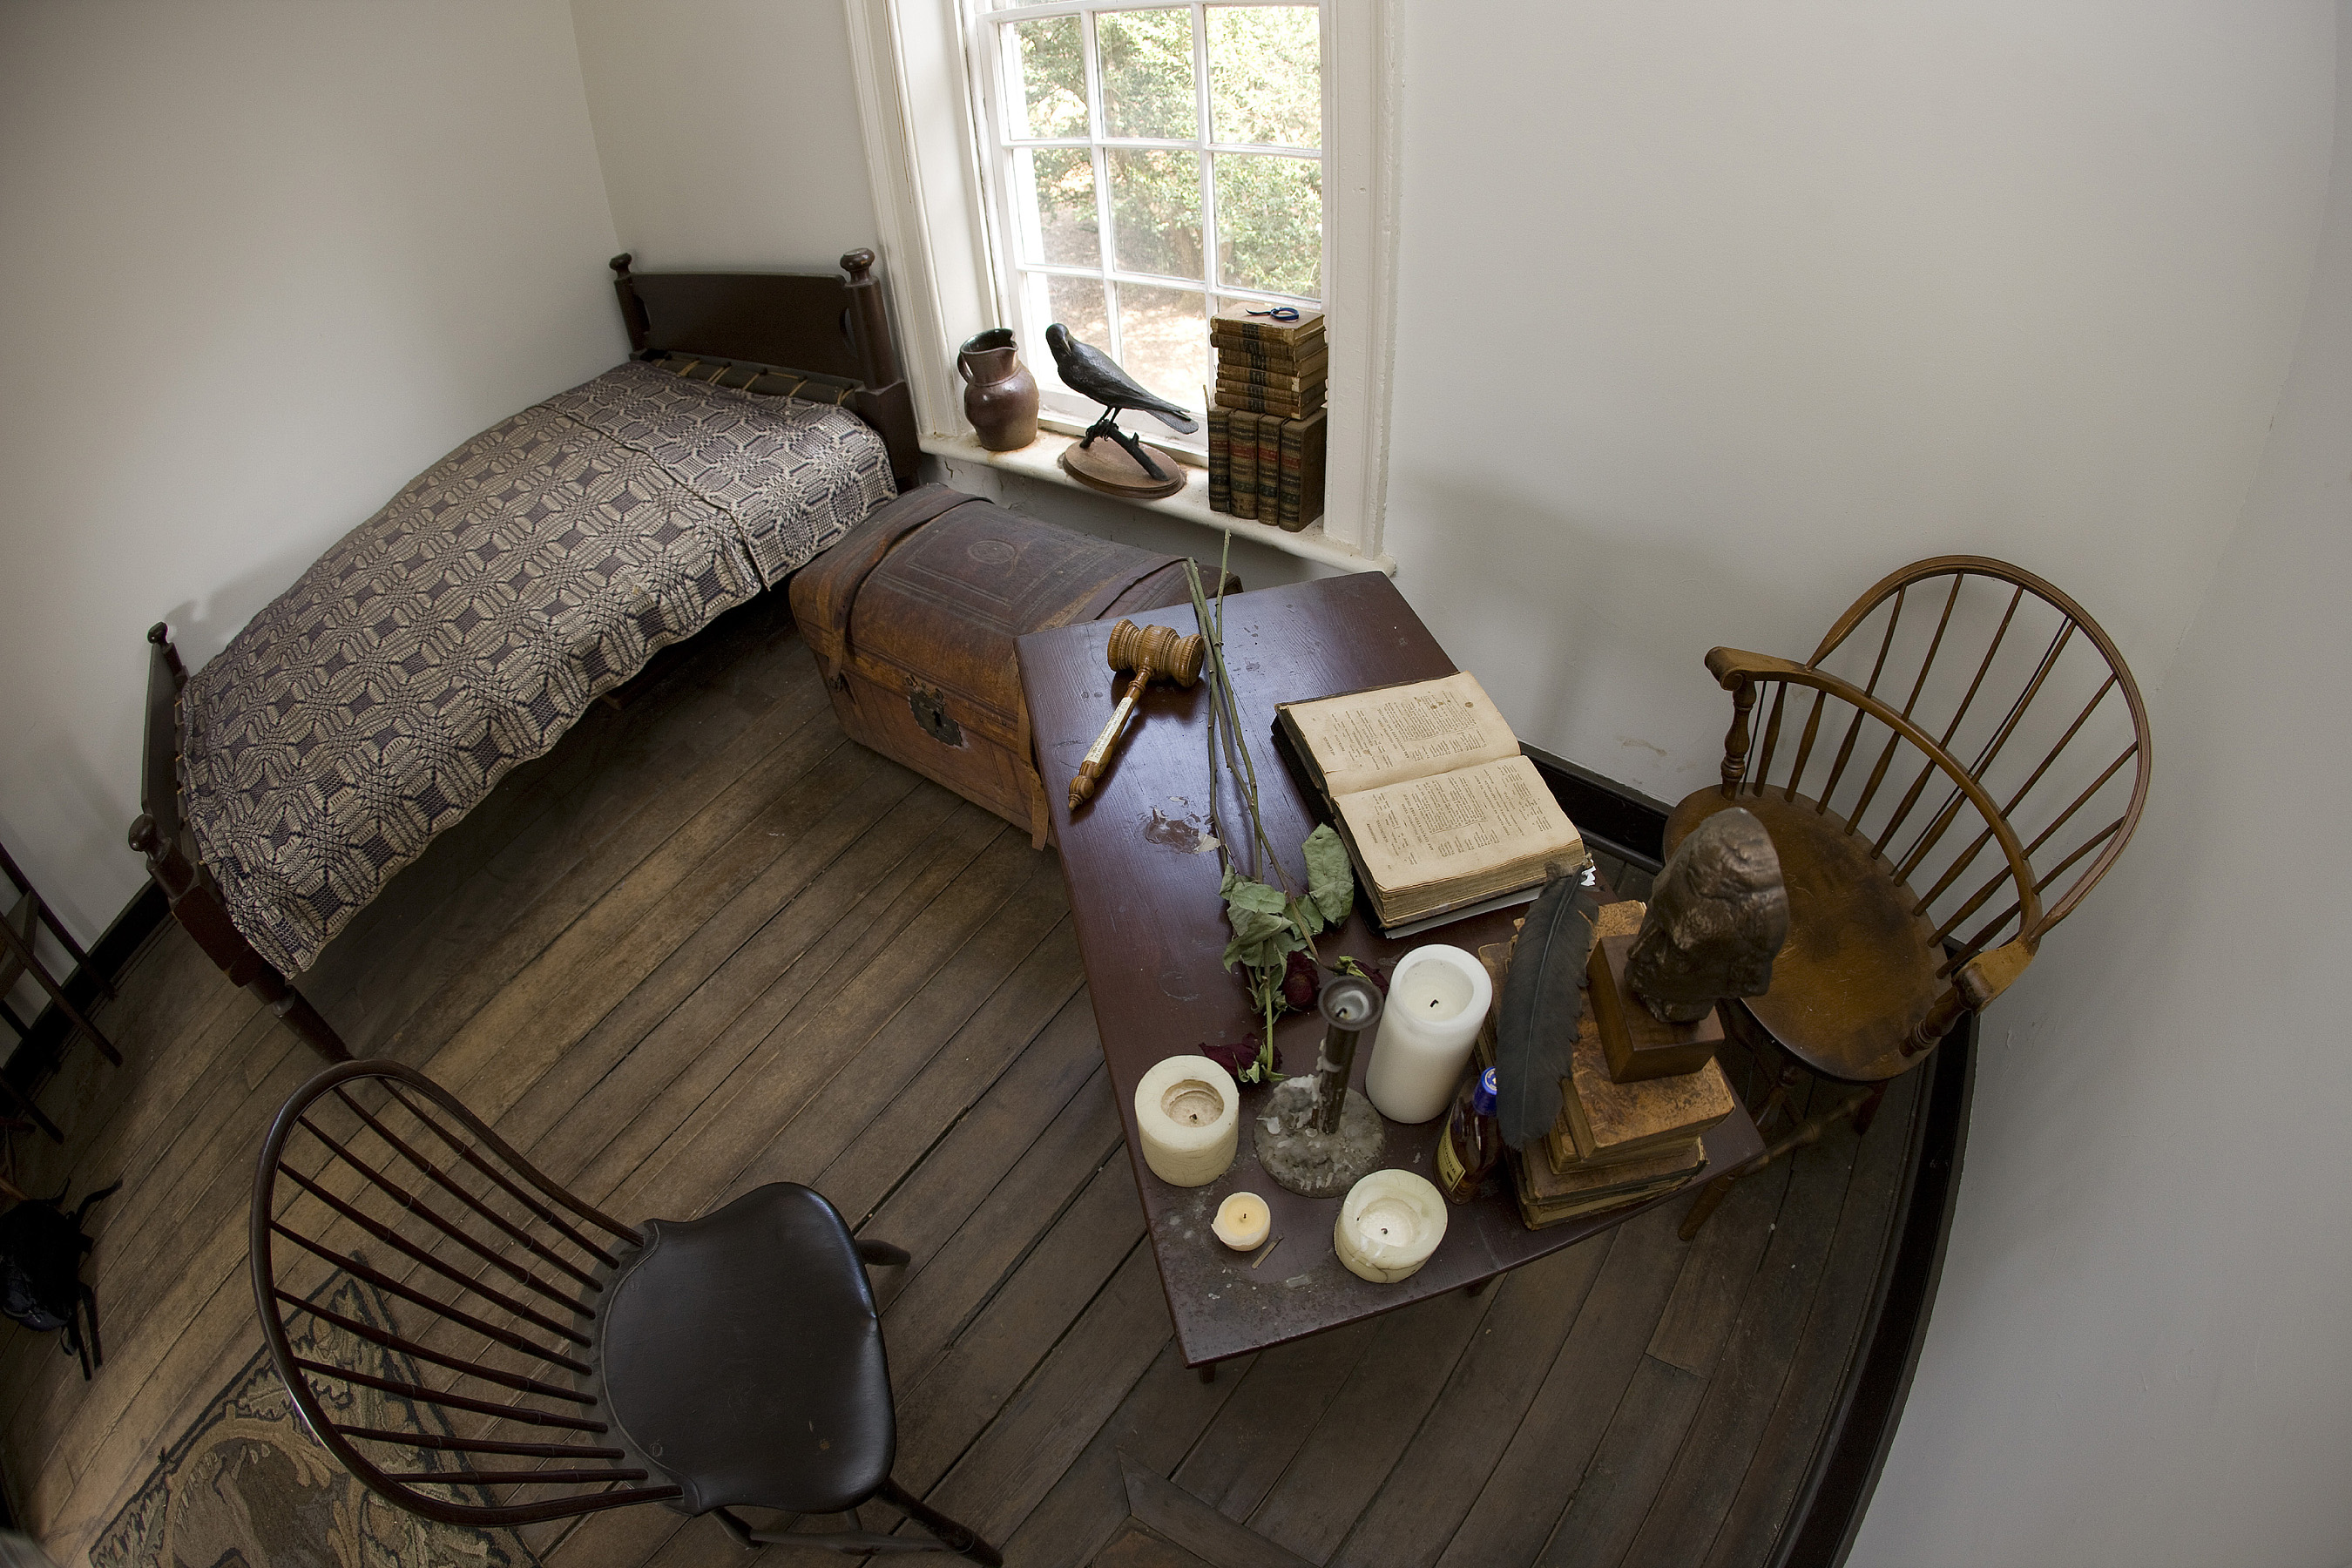 Bed, trunk, desk, chairs, candles, and old books sit in the Lawn room 13 where Edgar Allan Poe lived